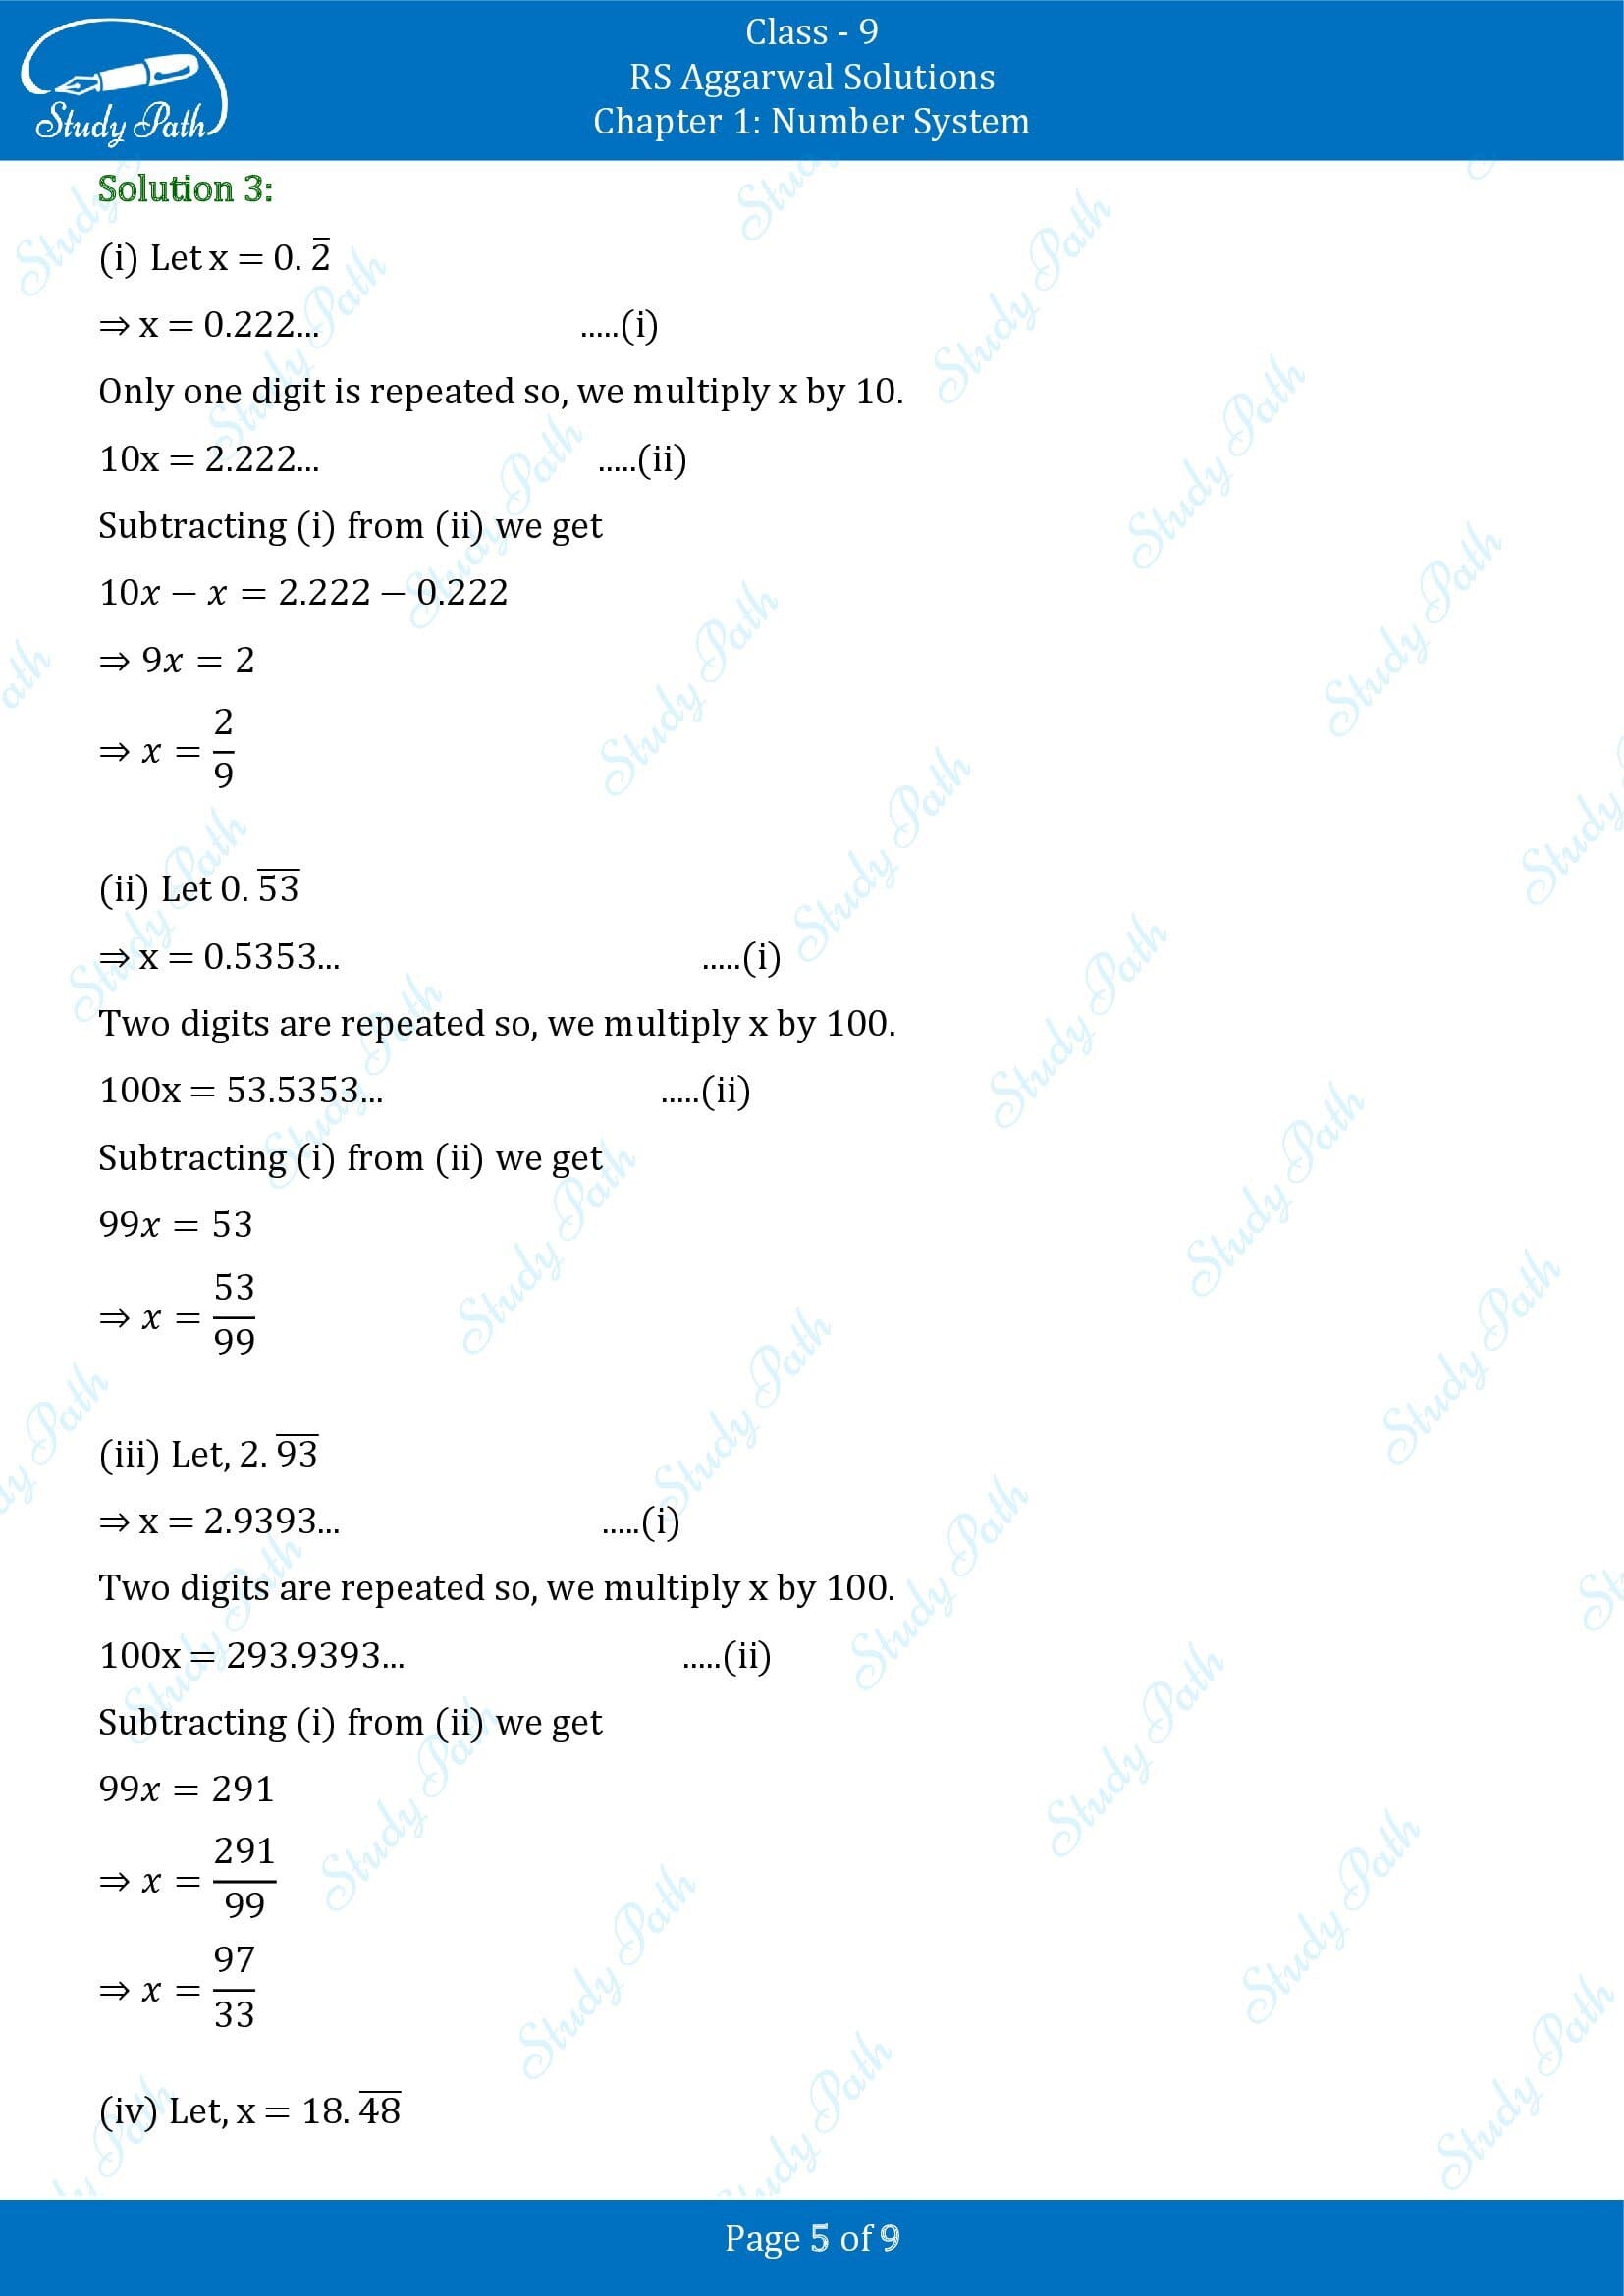 RS Aggarwal Solutions Class 9 Chapter 1 Number System Exercise 1B 00005